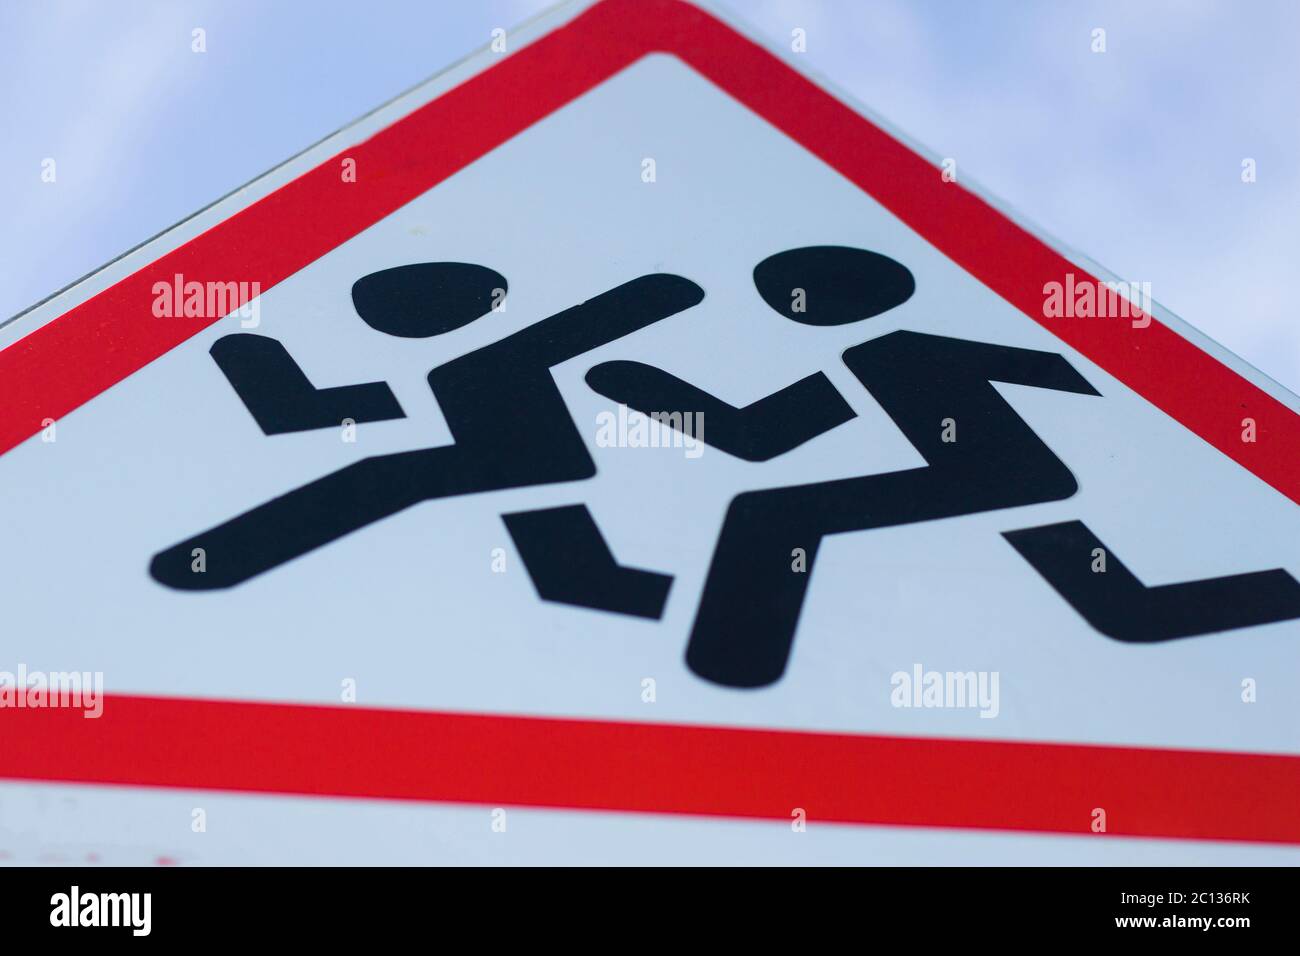 Information road sign, triangular white shield with running figures. Attention, school ahead, reduce speed recommendation. Stock Photo